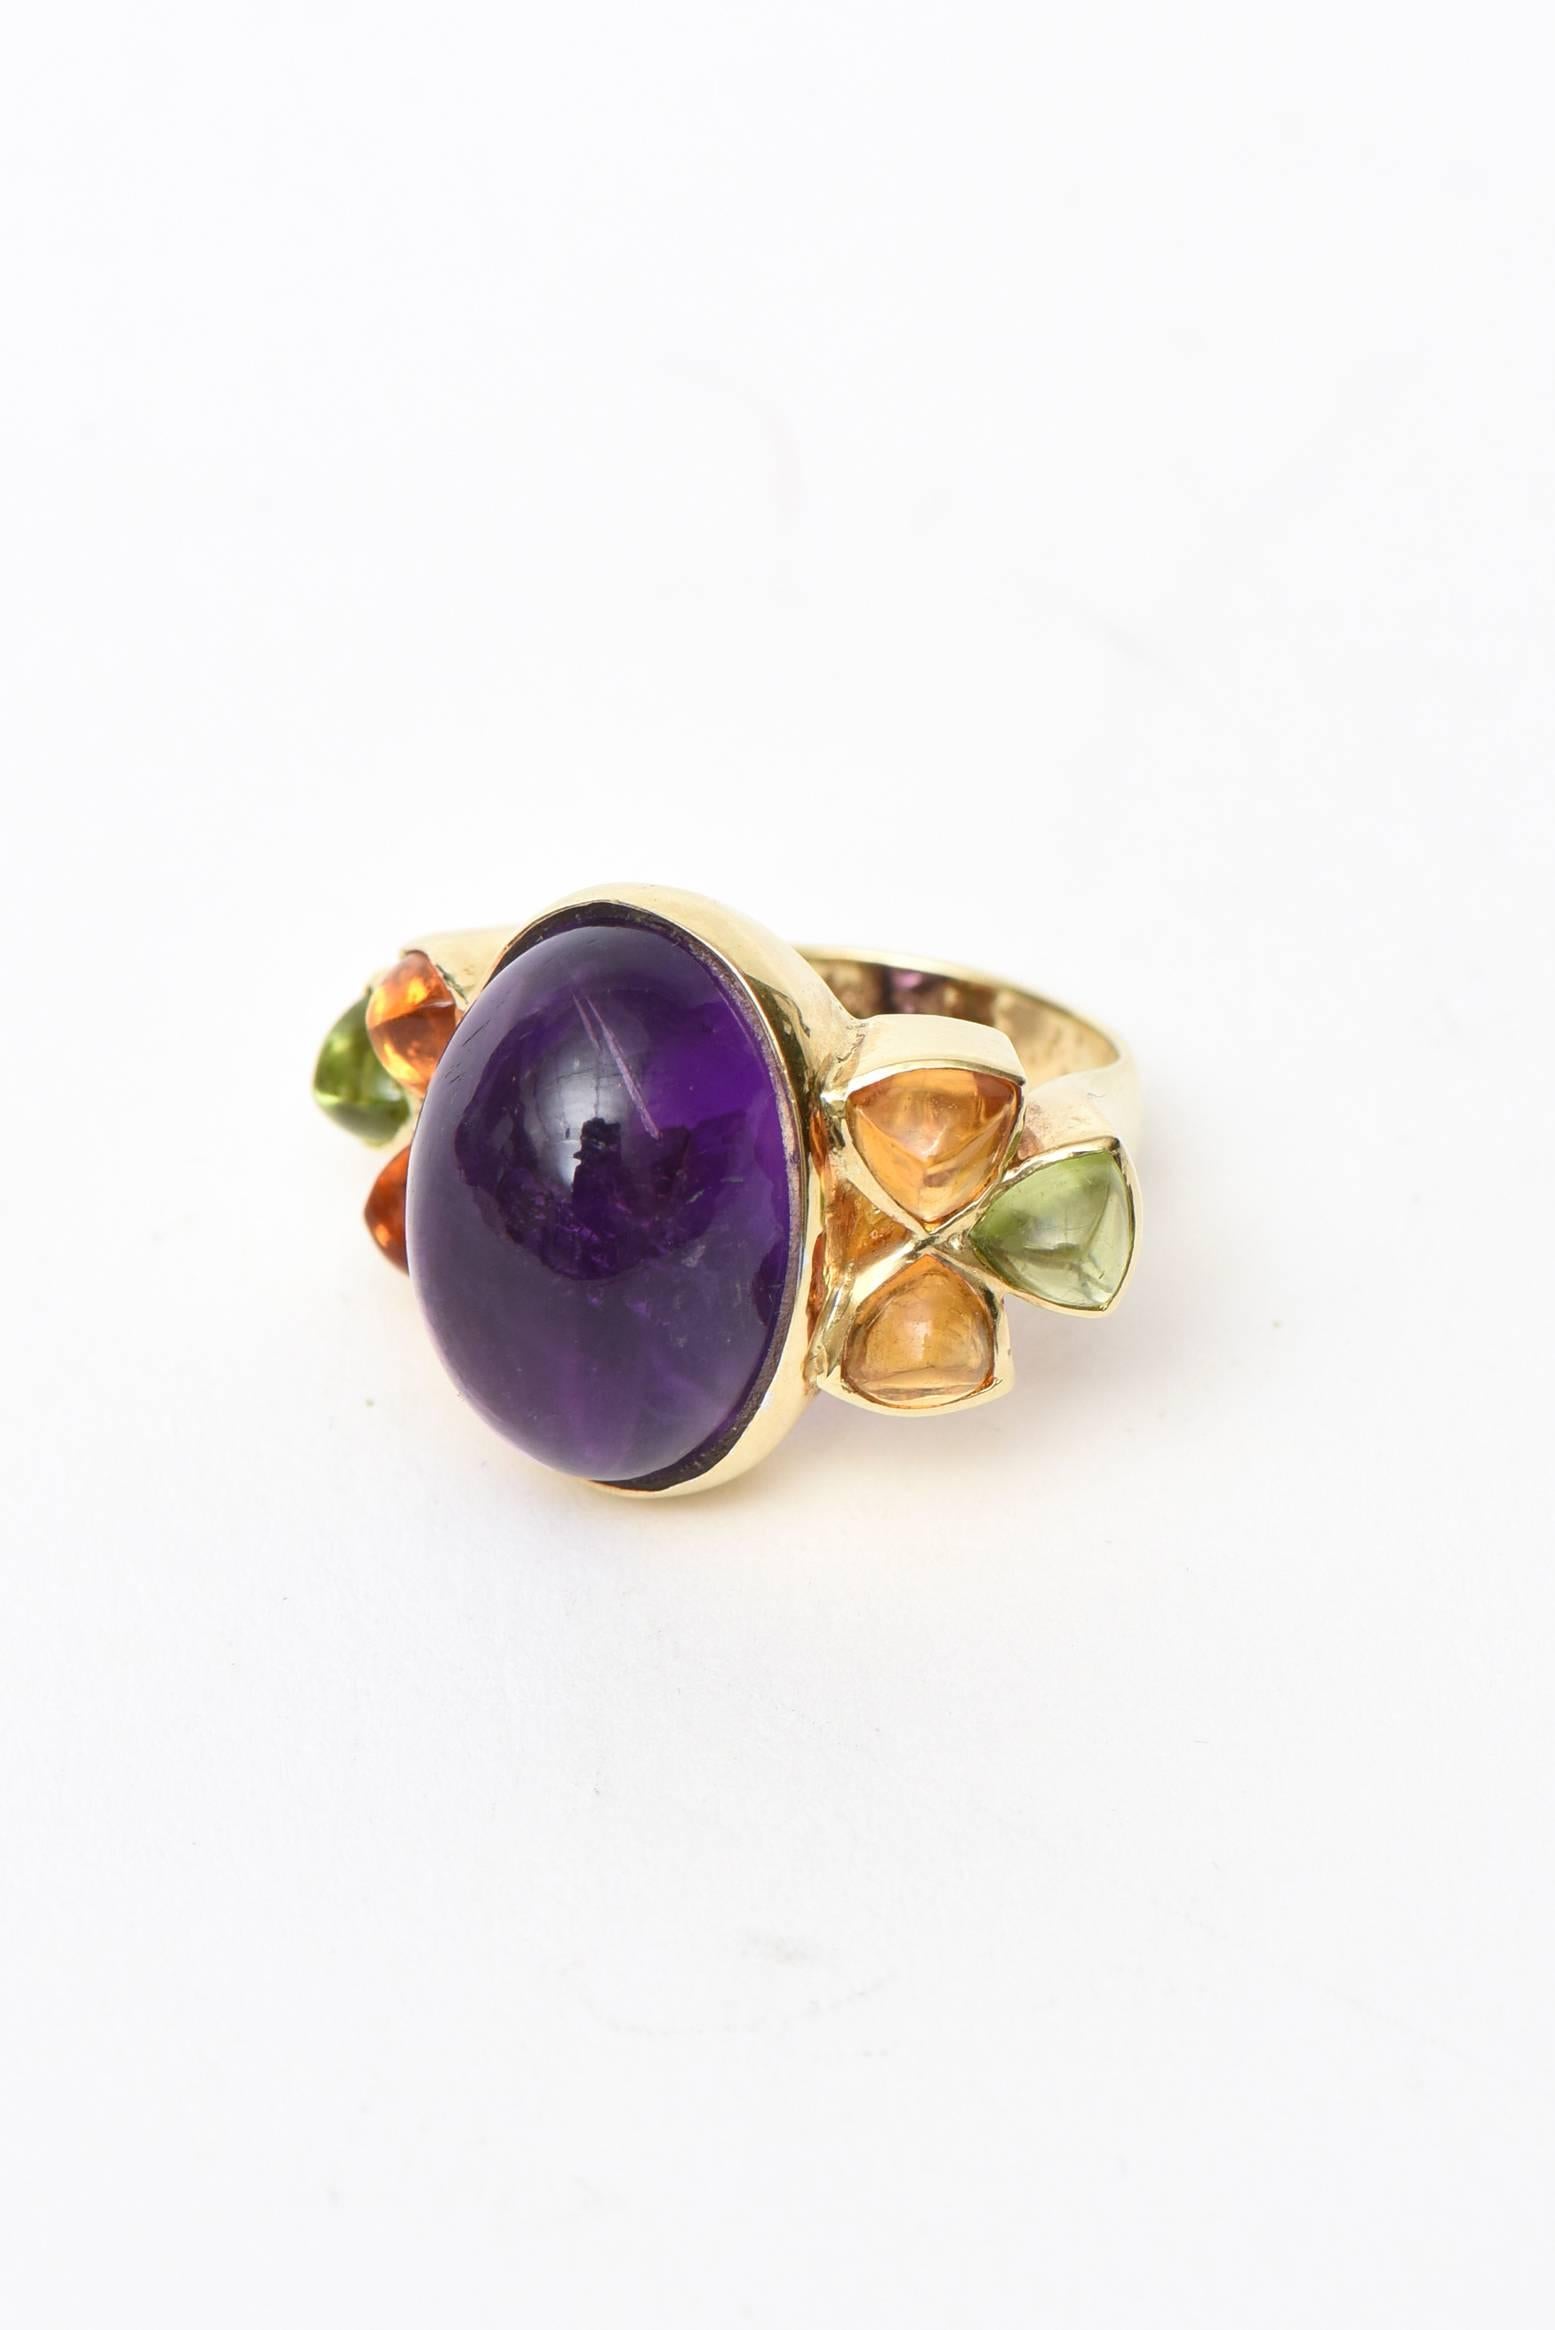 This colorful and lovely cocktail ring and or ring can be worn day to evening. It has a large amethyst stone in the center and is surrounded on either side by citrine and peridot. It is one oval cabochon cut amethyst that measures approx. 18.00 x